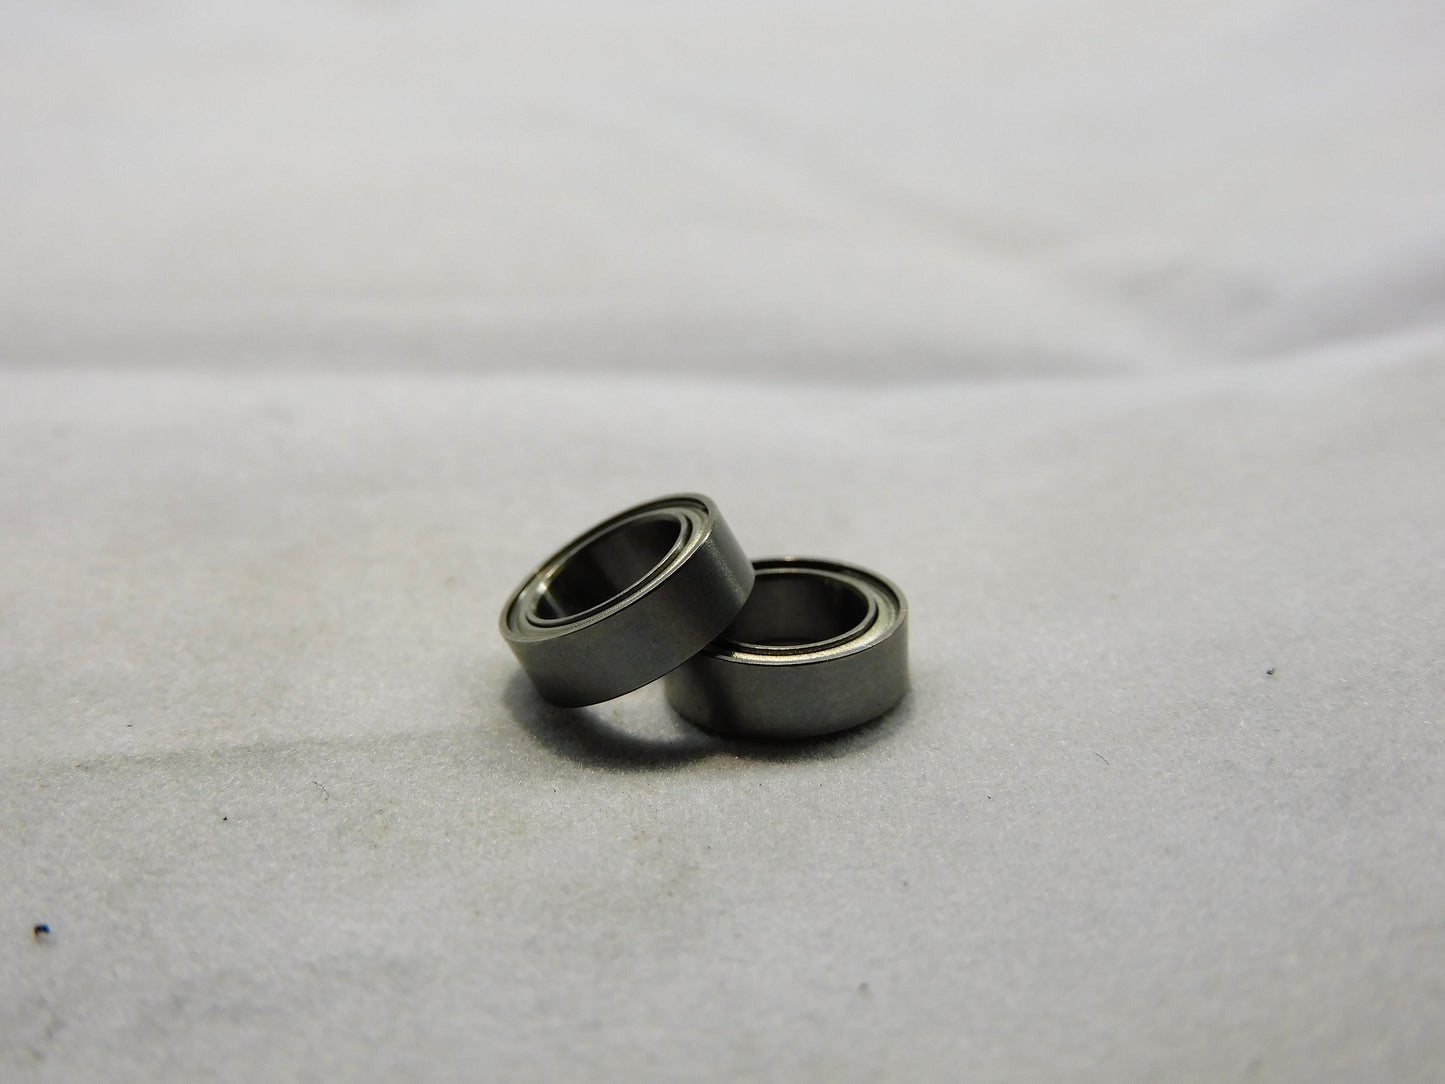 1/4" x 3/8" Rear Axle Bearings - Unflanged